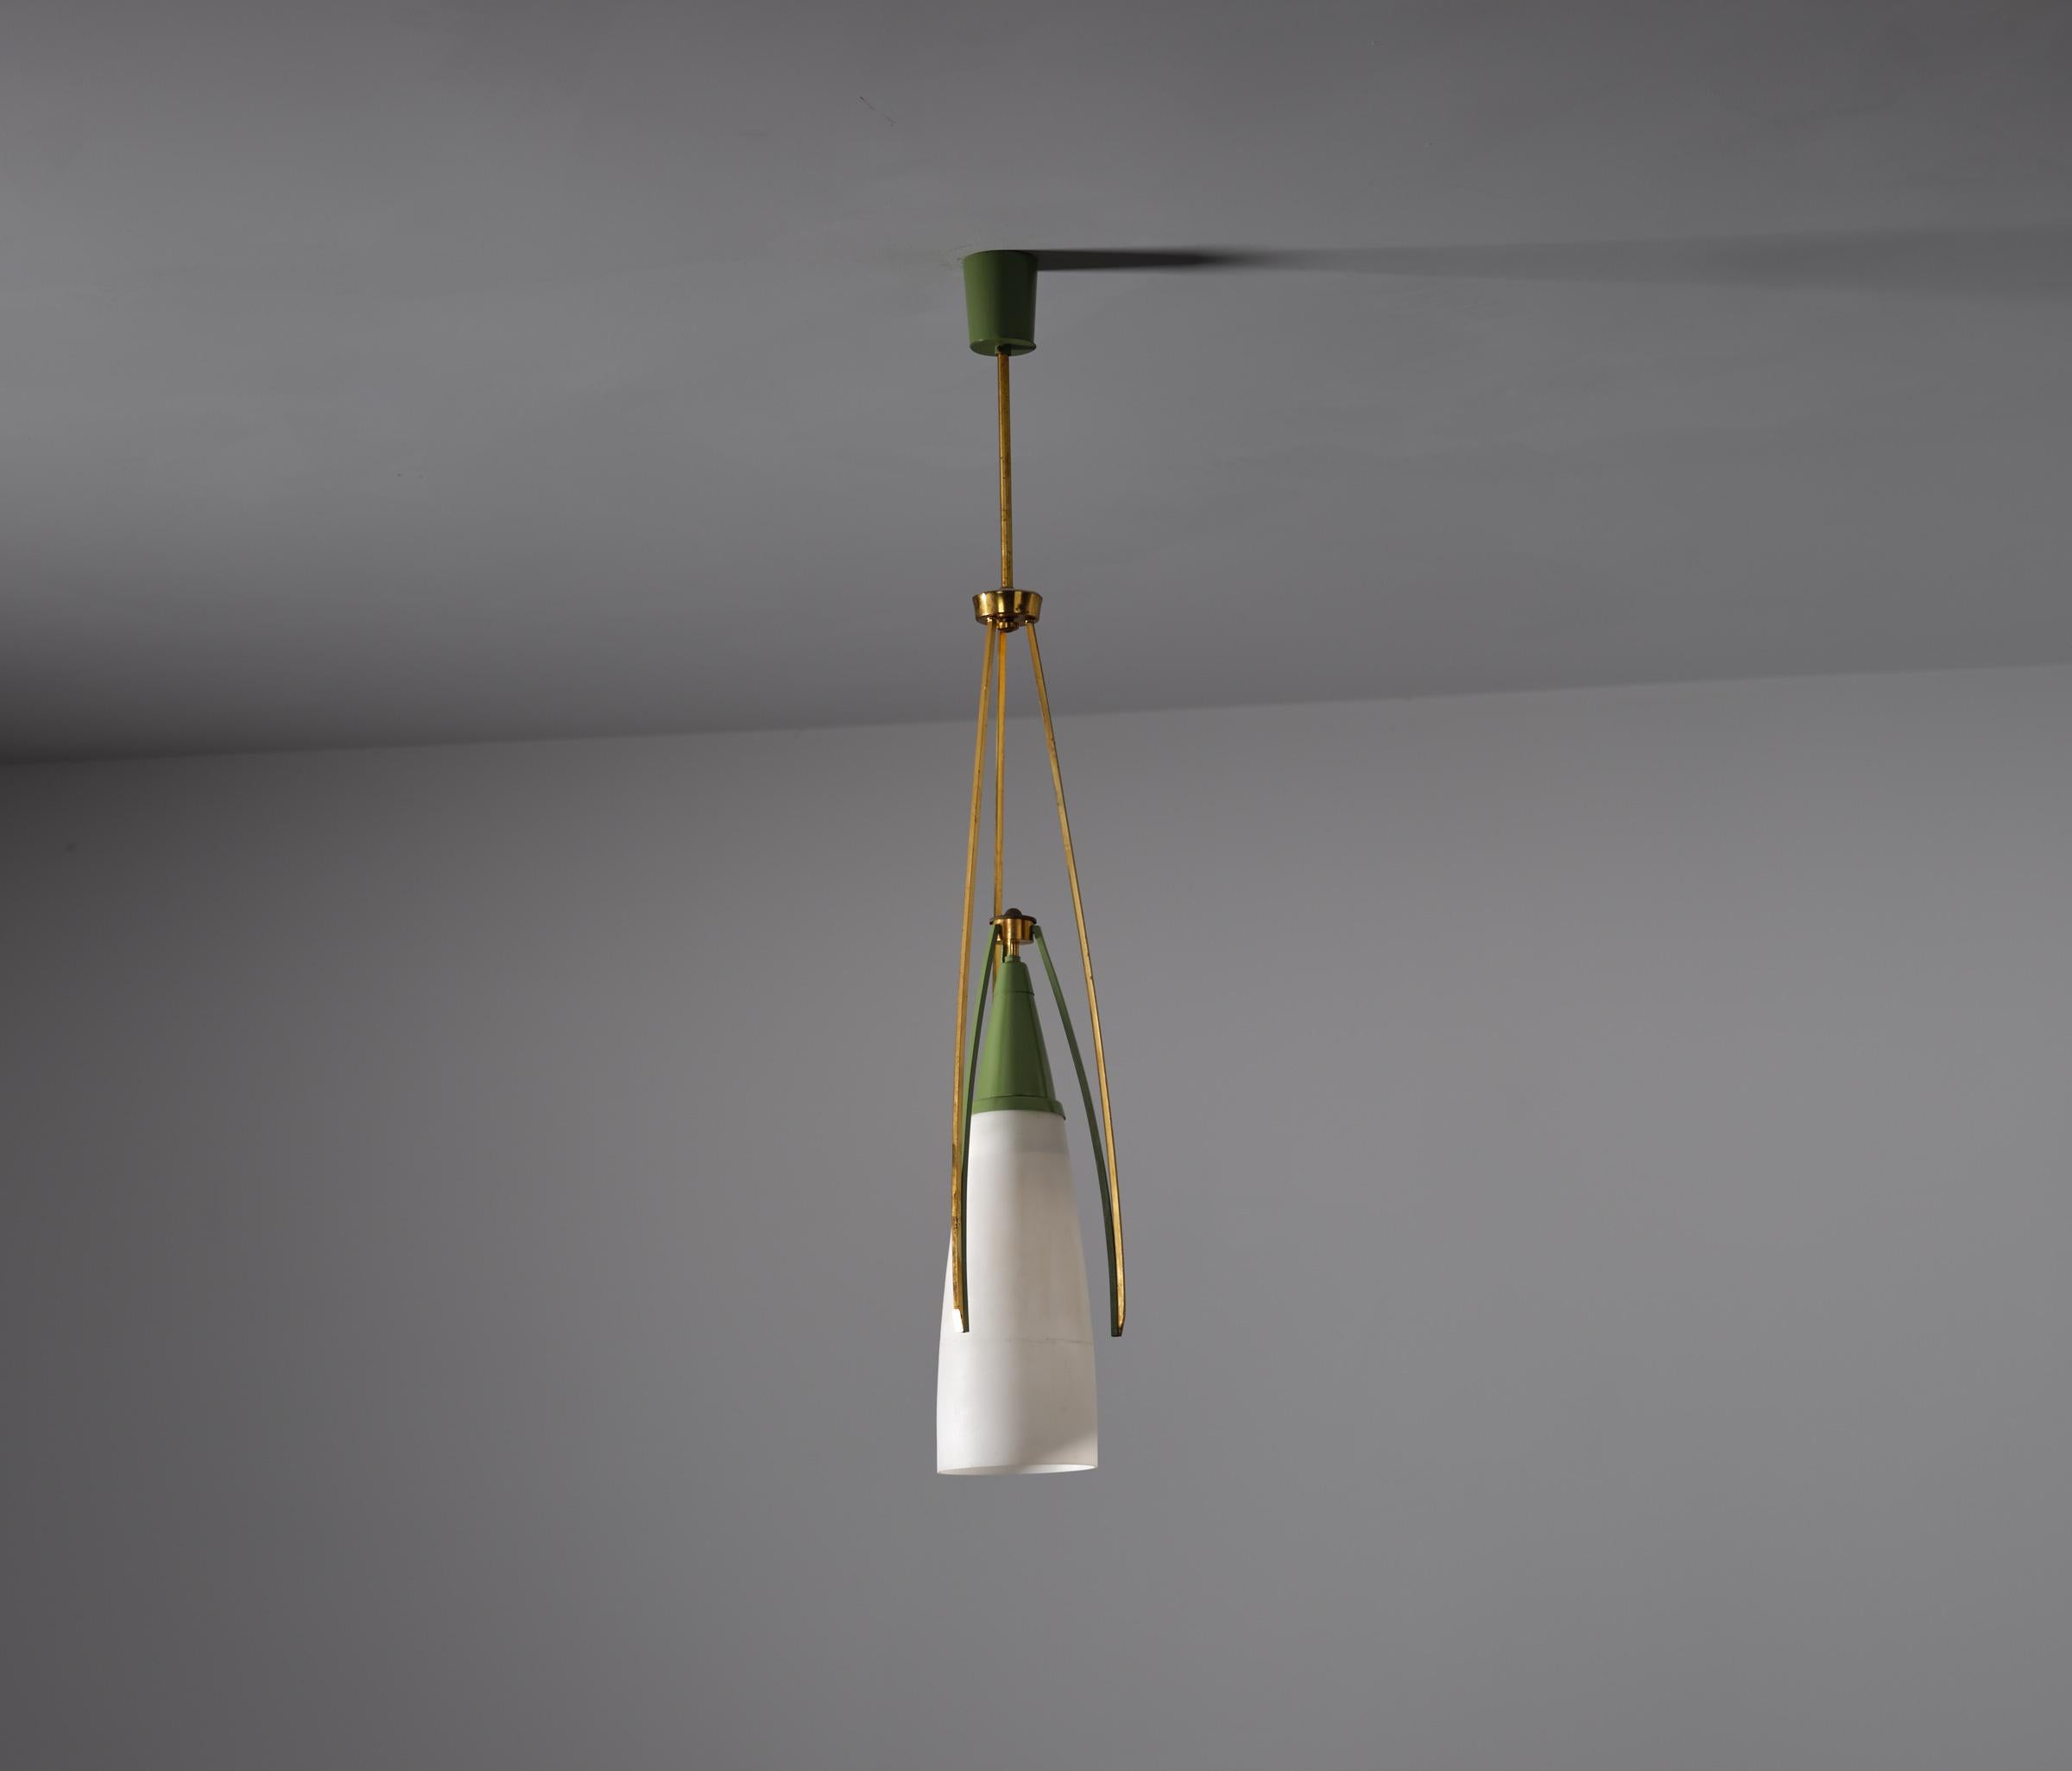 A pendant chandelier from the 1950s, reflecting the period's Italian design and manufacturing. This piece combines functionality with a clean aesthetic, suited for various interior styles.

Details:

1950s origin, Italian design and